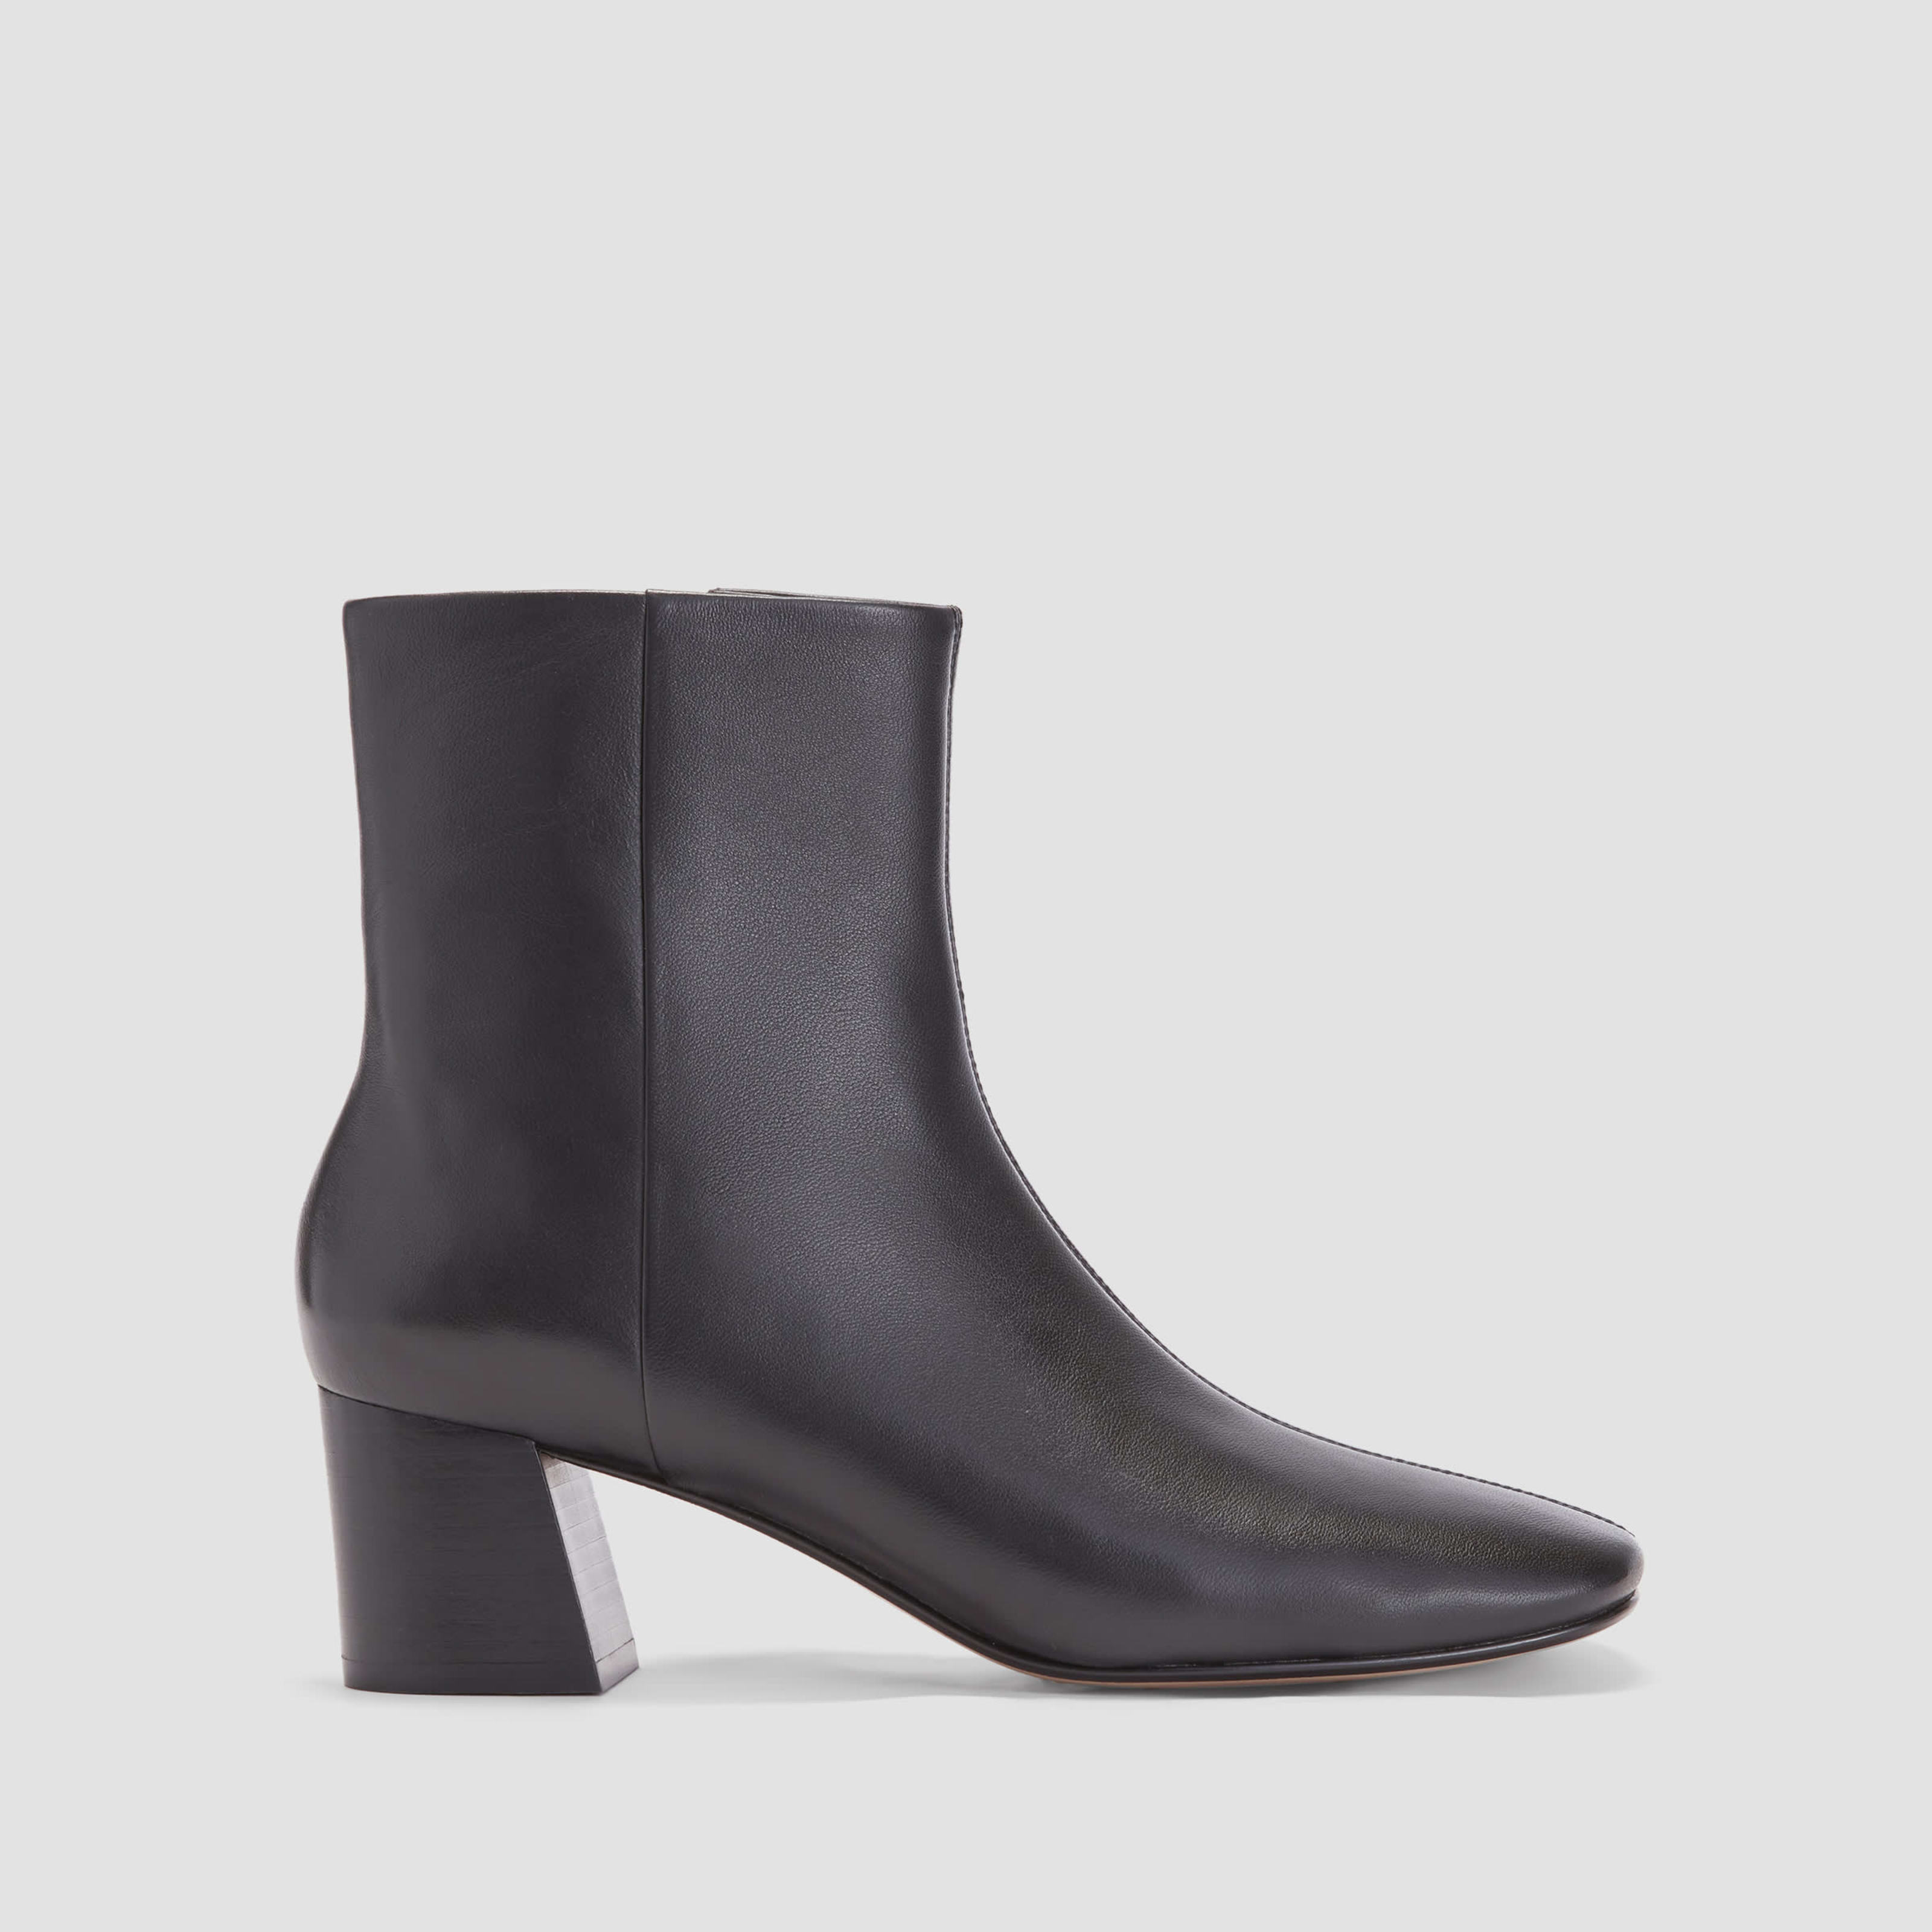 chelsea boot by everlane in black, size 5